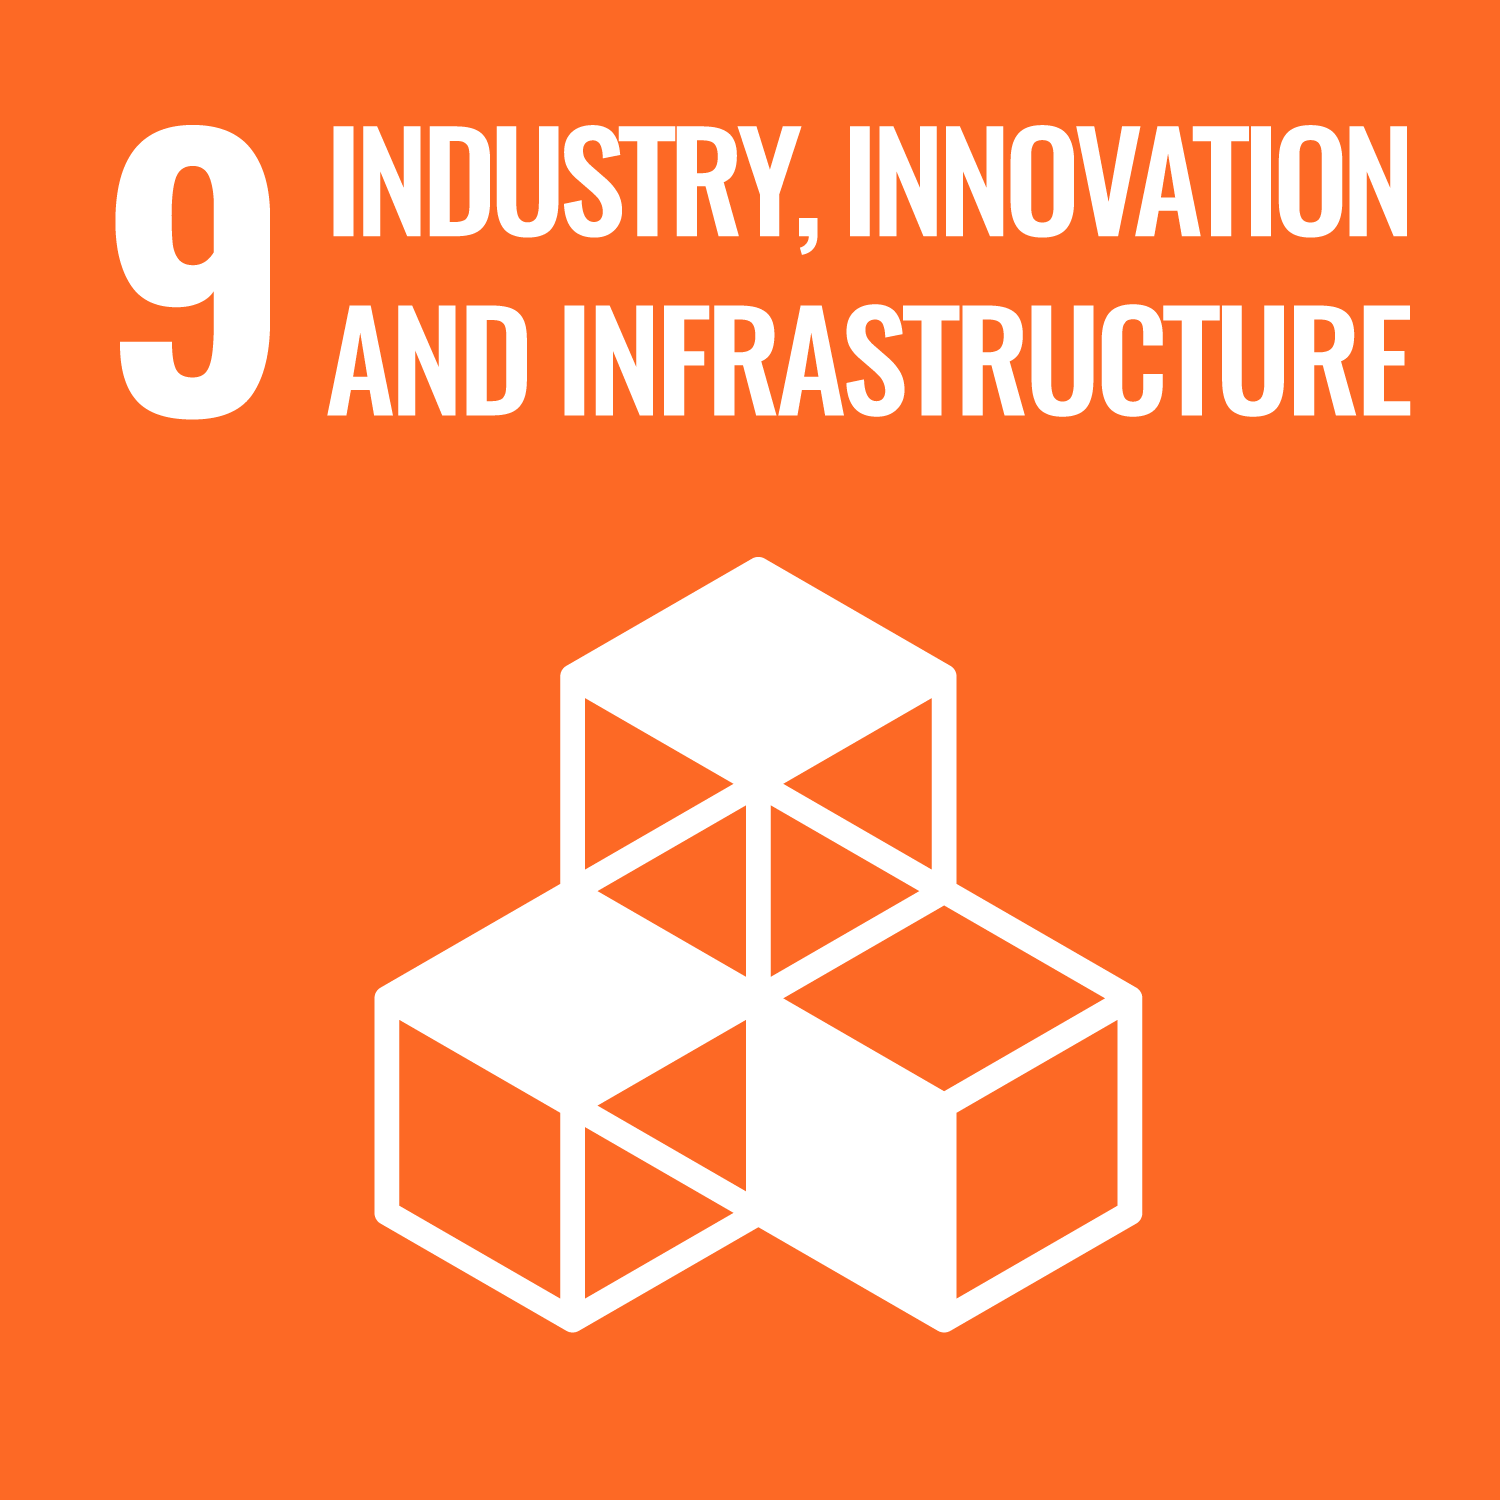 9｜INDUSTRY,INNOVATION AND INFRASTRUCTURE